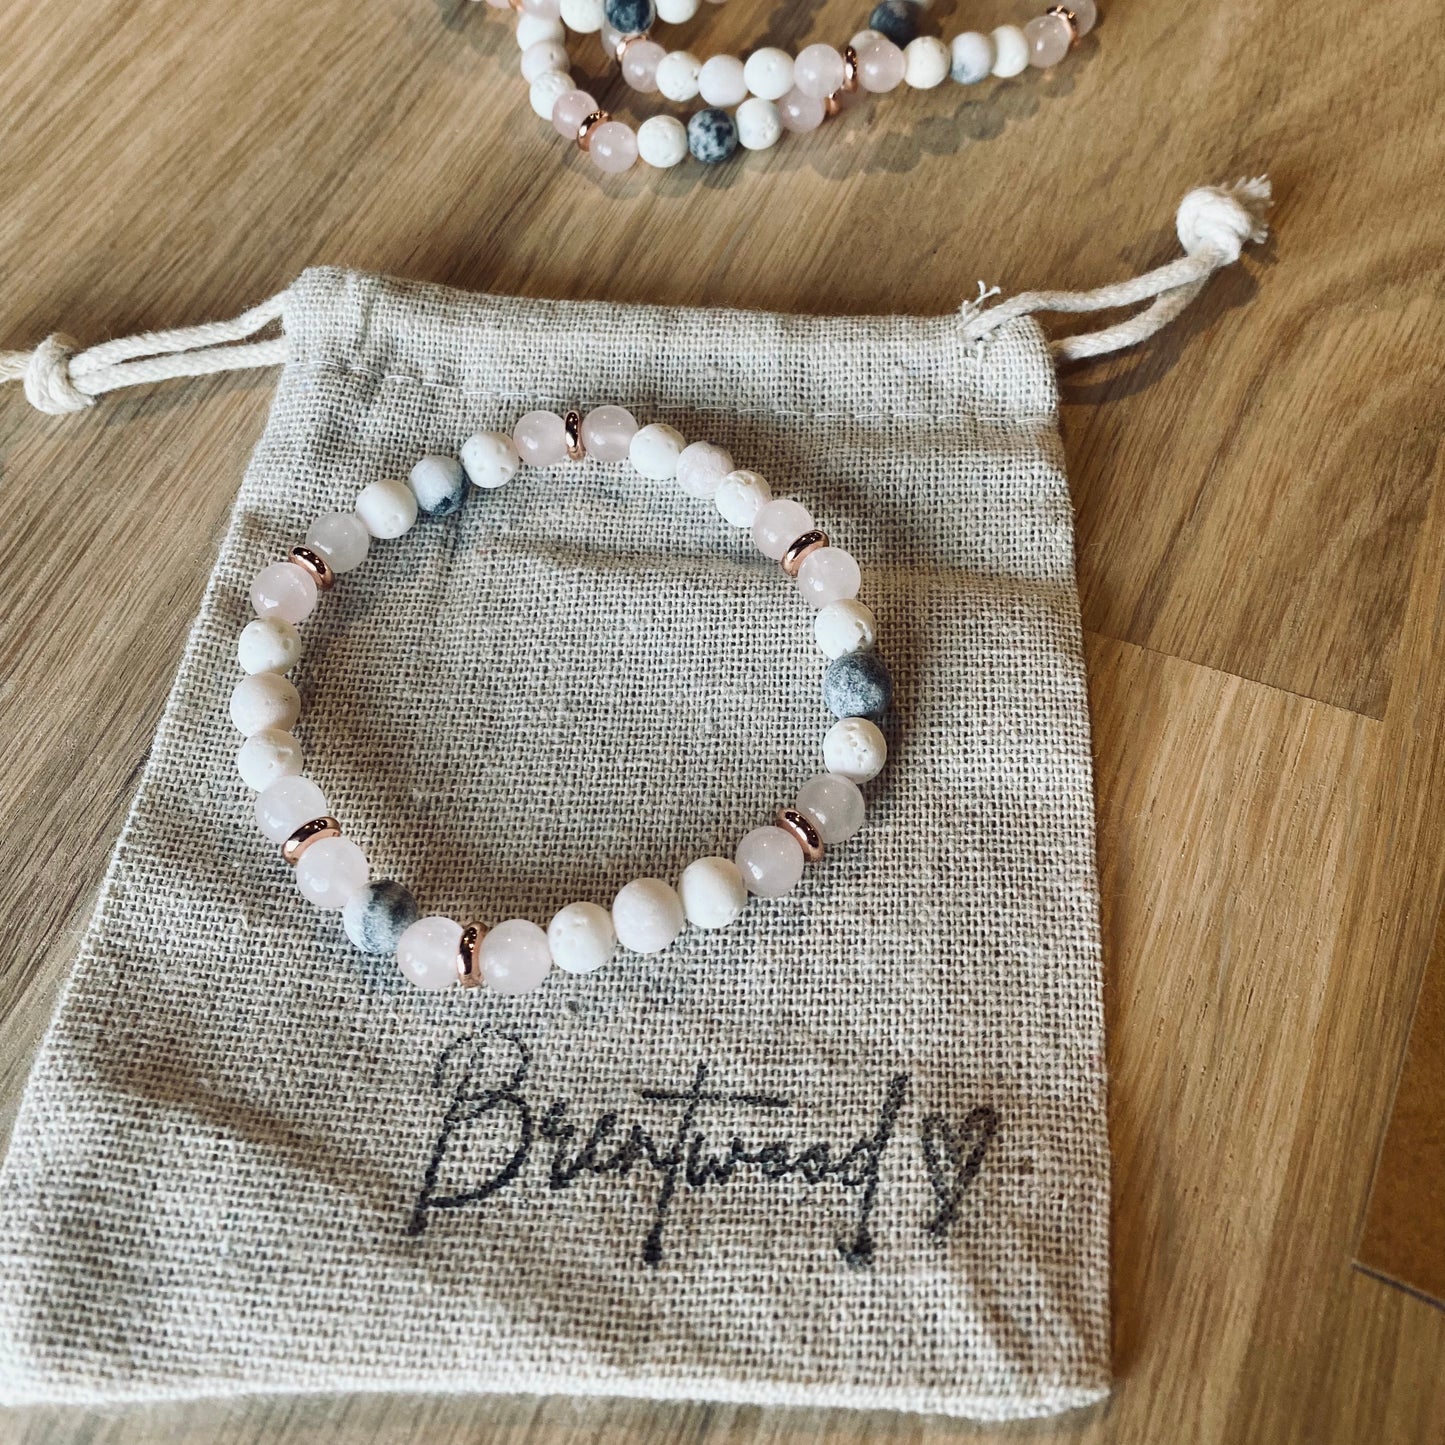 Pink Zebra Jasper Aroma Bracelet - 6mm beaded diffuser bracelet made from a pattern of pink zebra jasper, rose quartz, white lava stone & rose gold disc embellishments. Laid on cloth pouch/drawstring bag stamped with “Brentwood” and a heart.